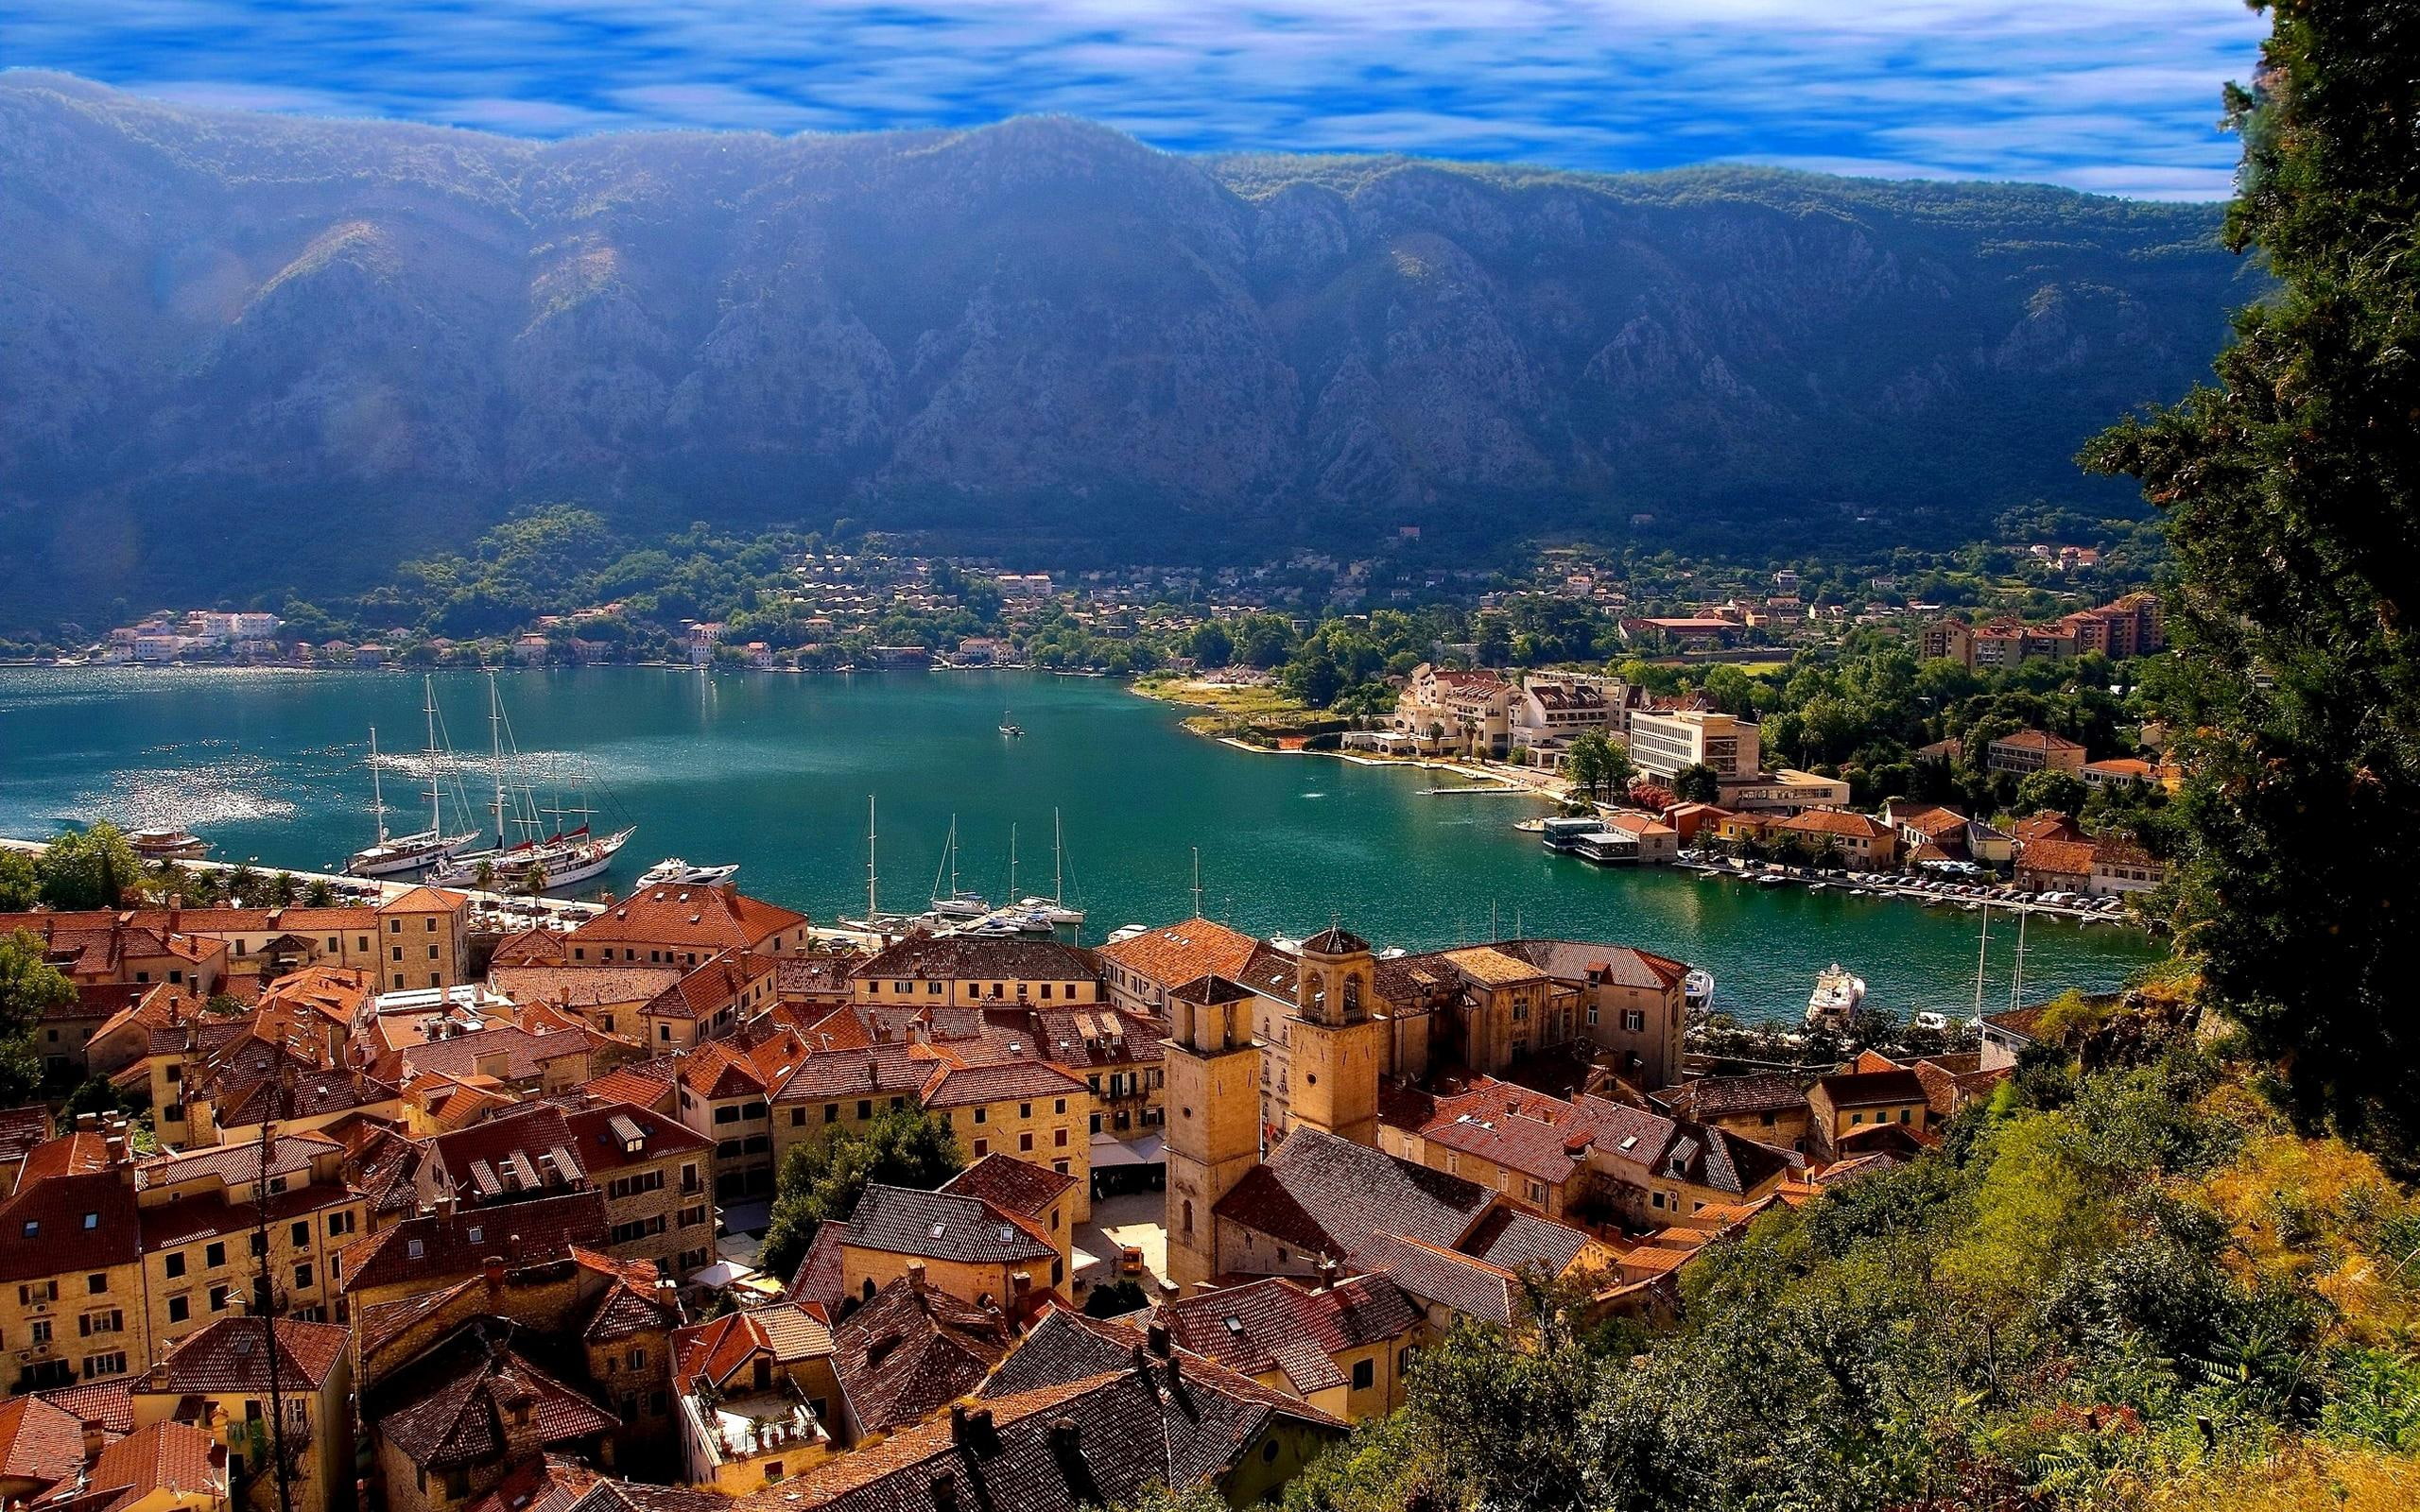 Perfect town, houses beside body of water and mountains, world